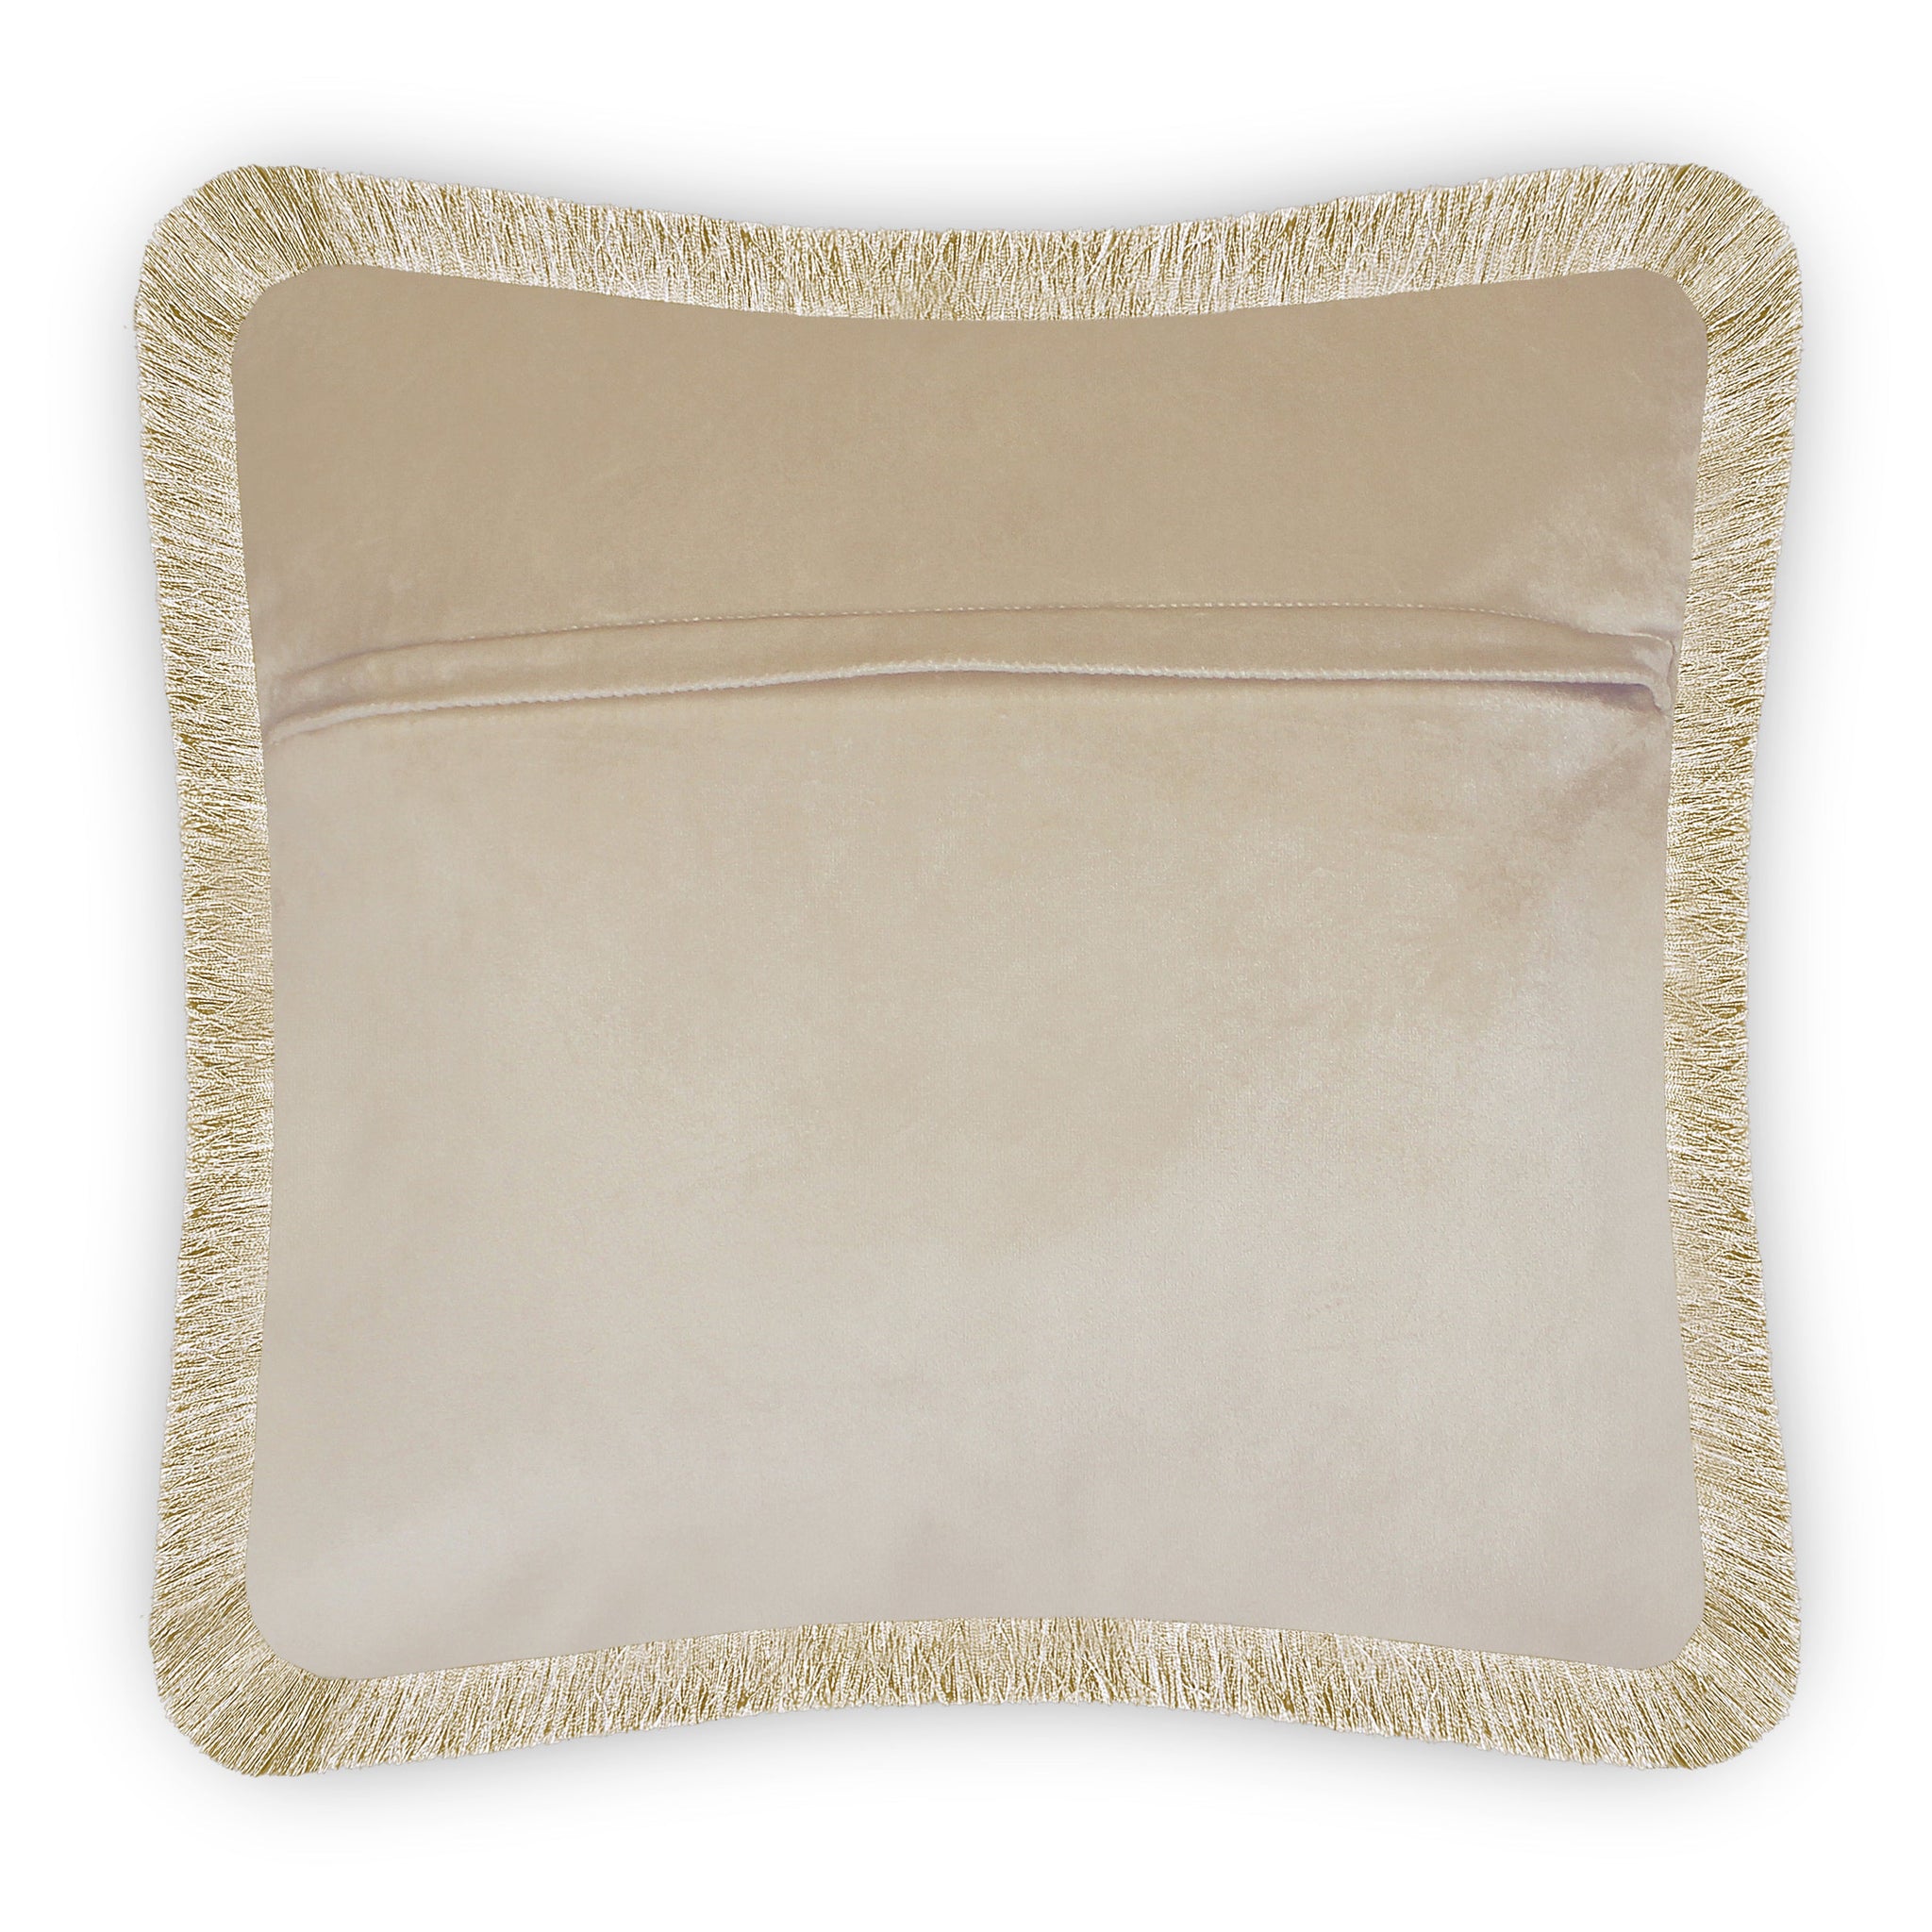 Velvet Dragonfly Embroidery Cushion Cover Home Decor Insect Decorative Pillowcase Cute Animal Throw Pillow with Golden Fringe for Bedroom Living Room Beige Size 45x45 cm (18x18 Inches)